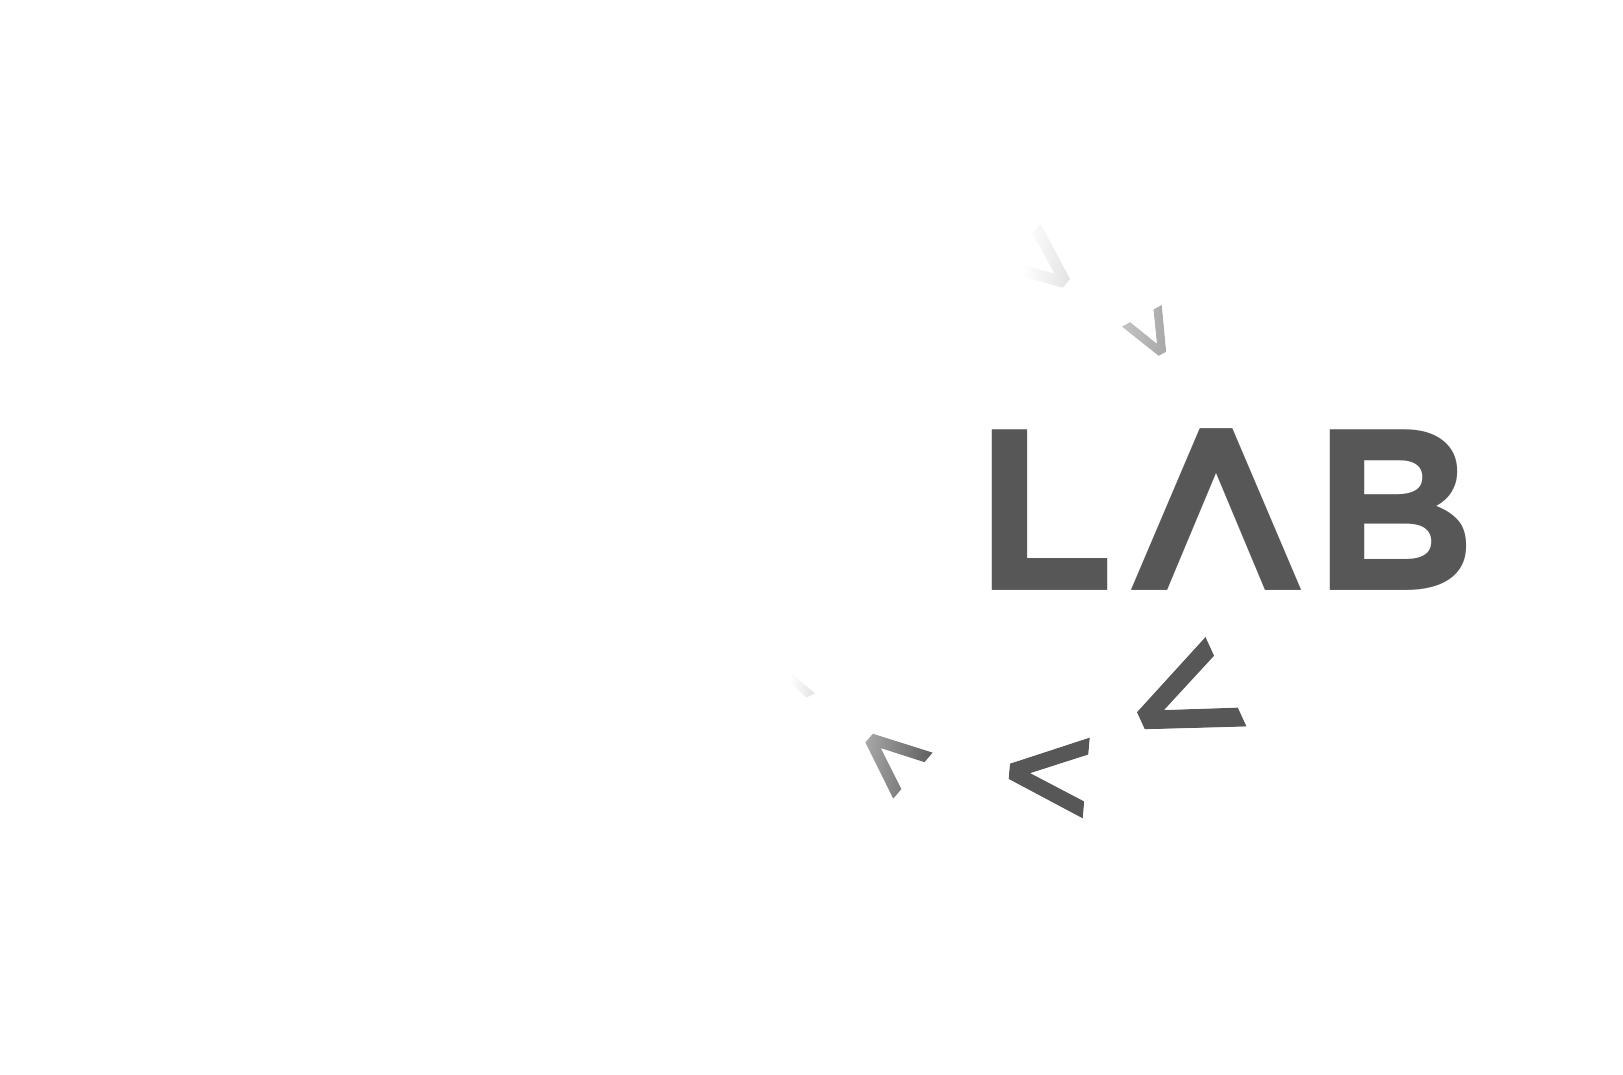 Reparlab: a second life for electronic parts